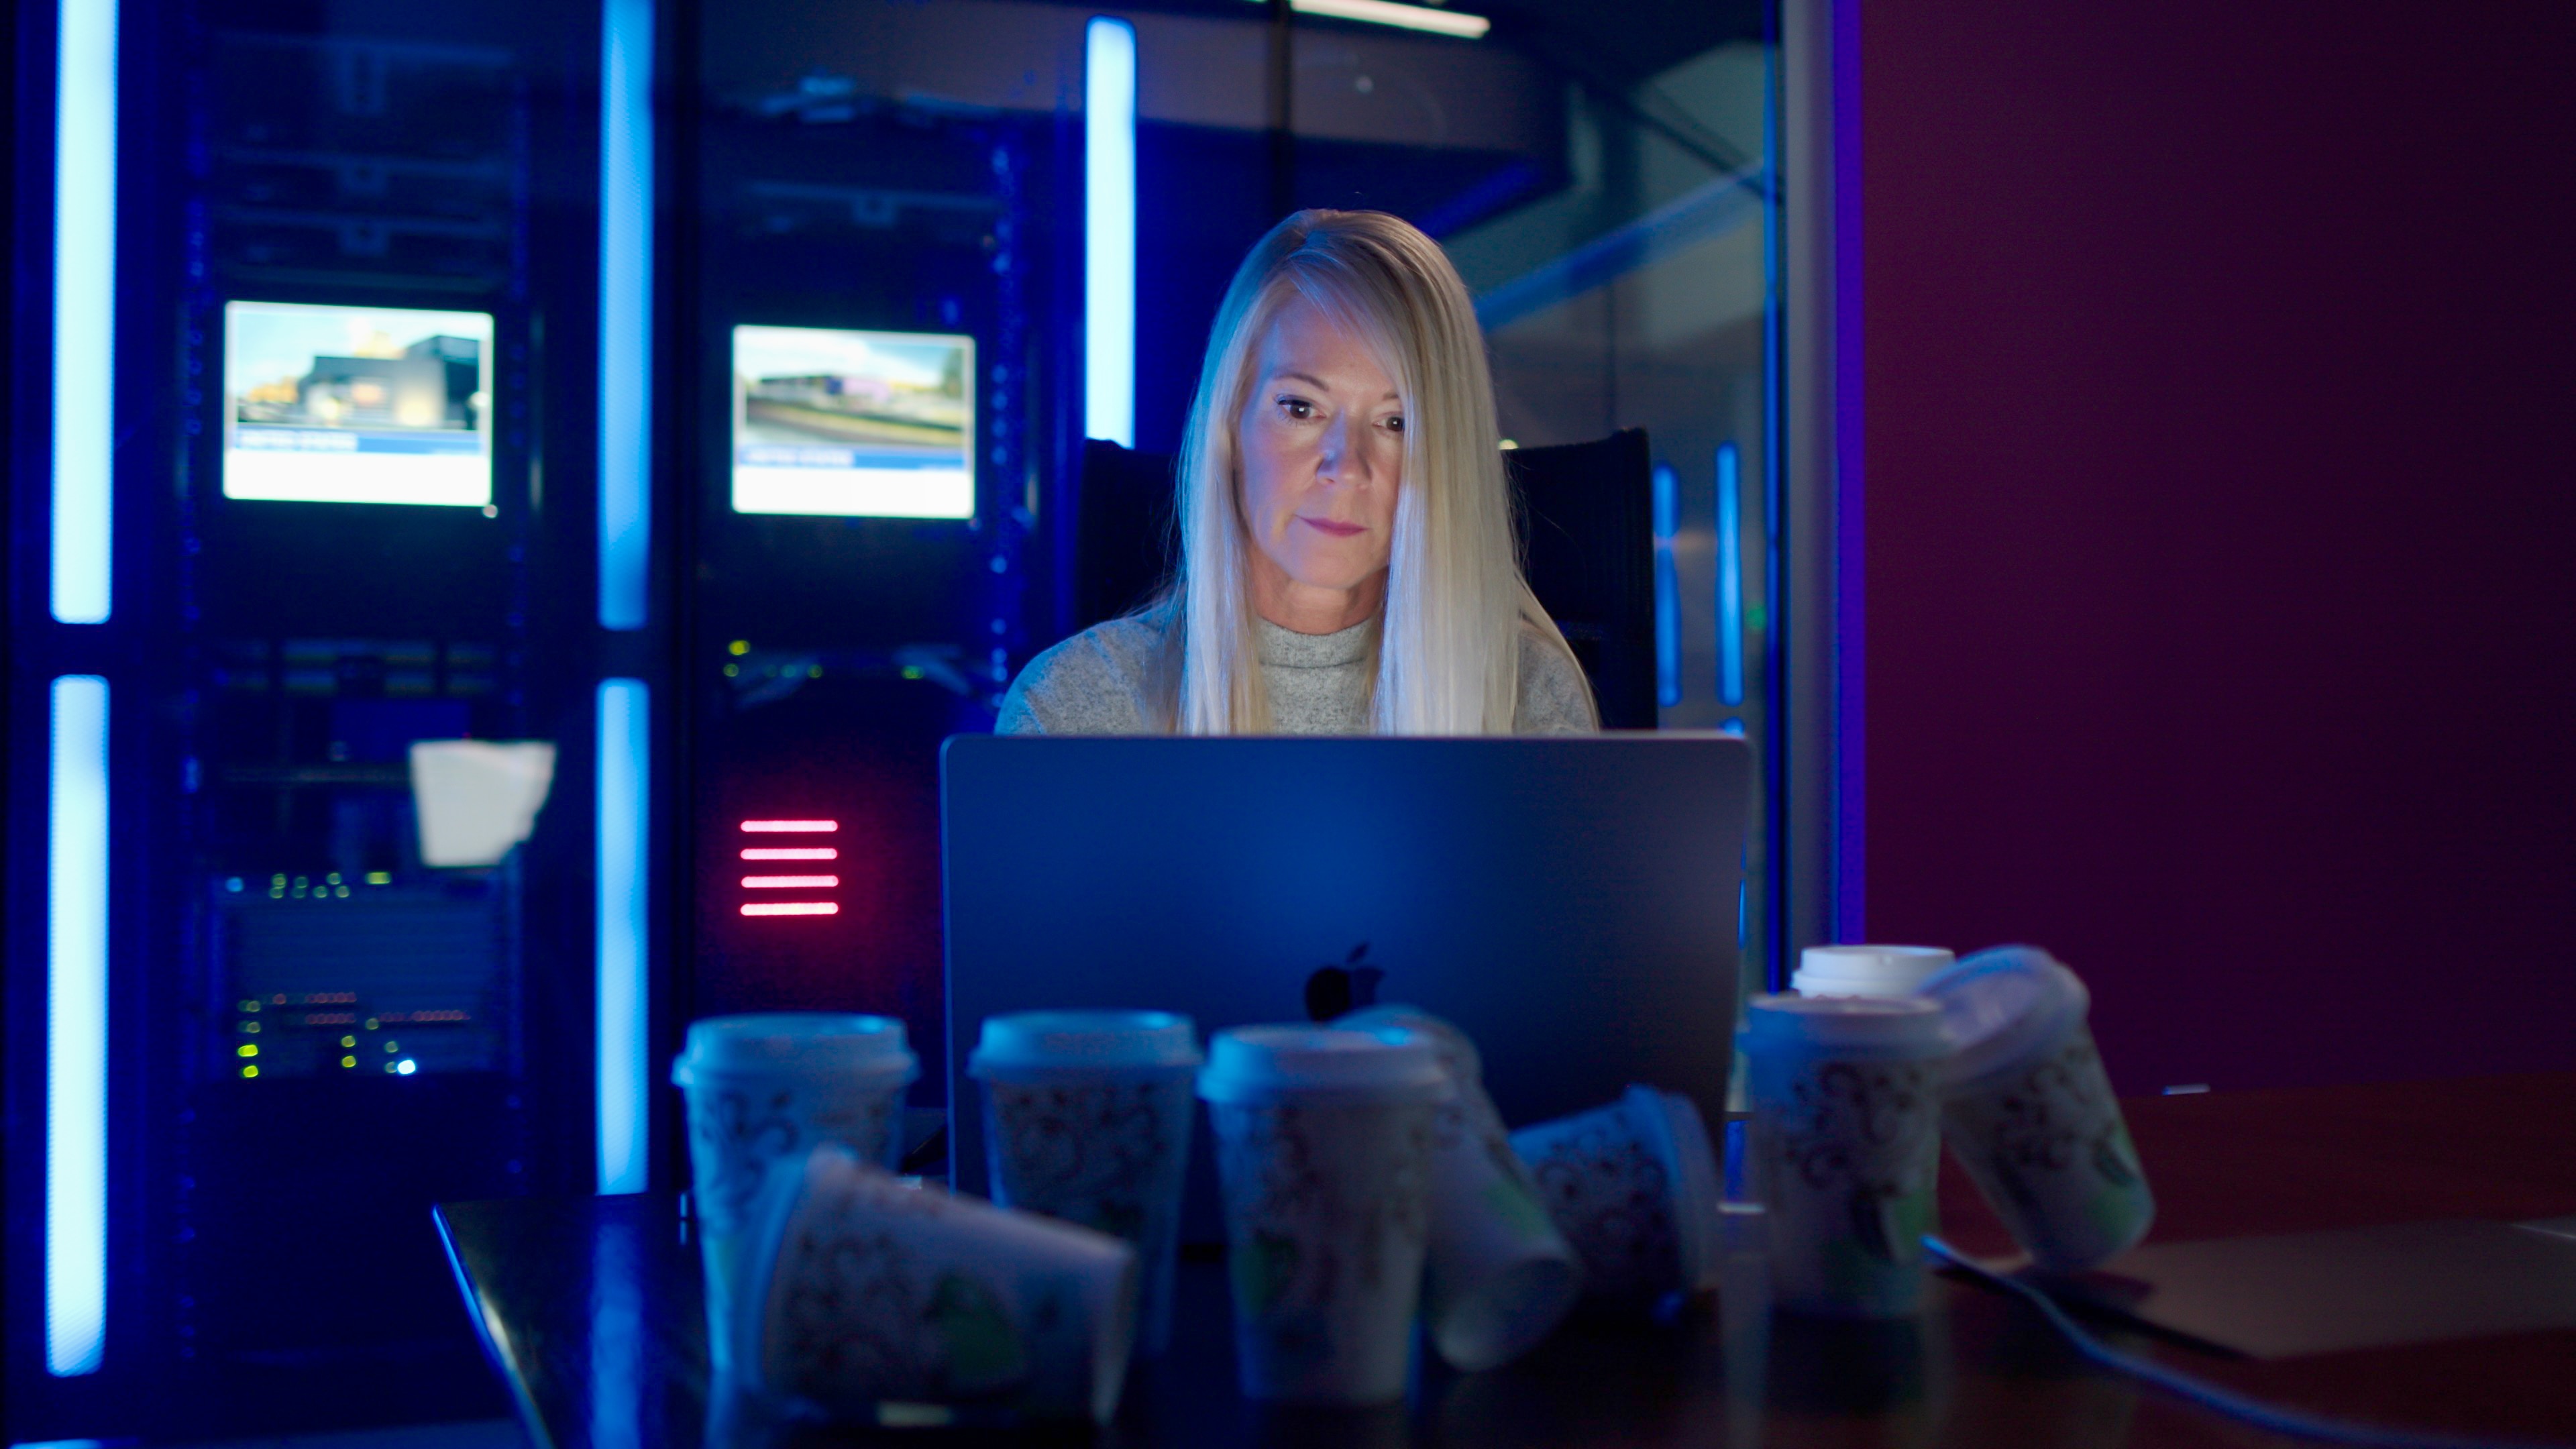 Woman working late at a data center surrounded by empty coffee cups